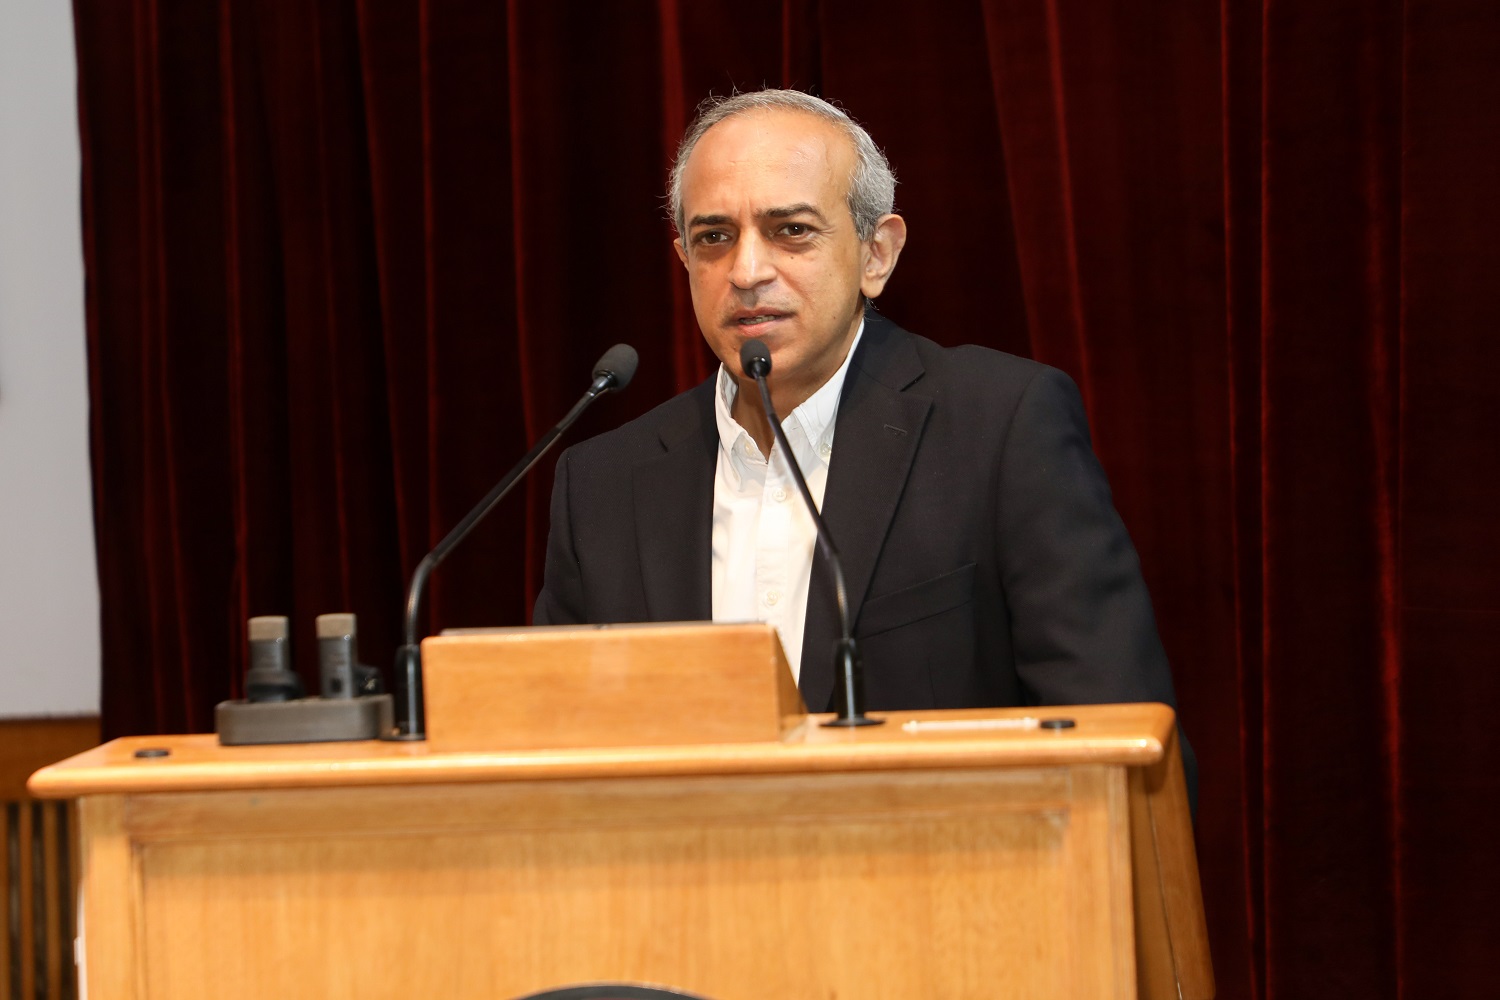 Prof. Ashok Thampy, Chairperson, EPGP, IIMB, welcomes the students to IIMB. He said Over the last 15 years, the EPGP has been going from strength to strength. Global and national rankings are a testament to this growth, at the inauguration of the EPGP Program on 25th March 2023.